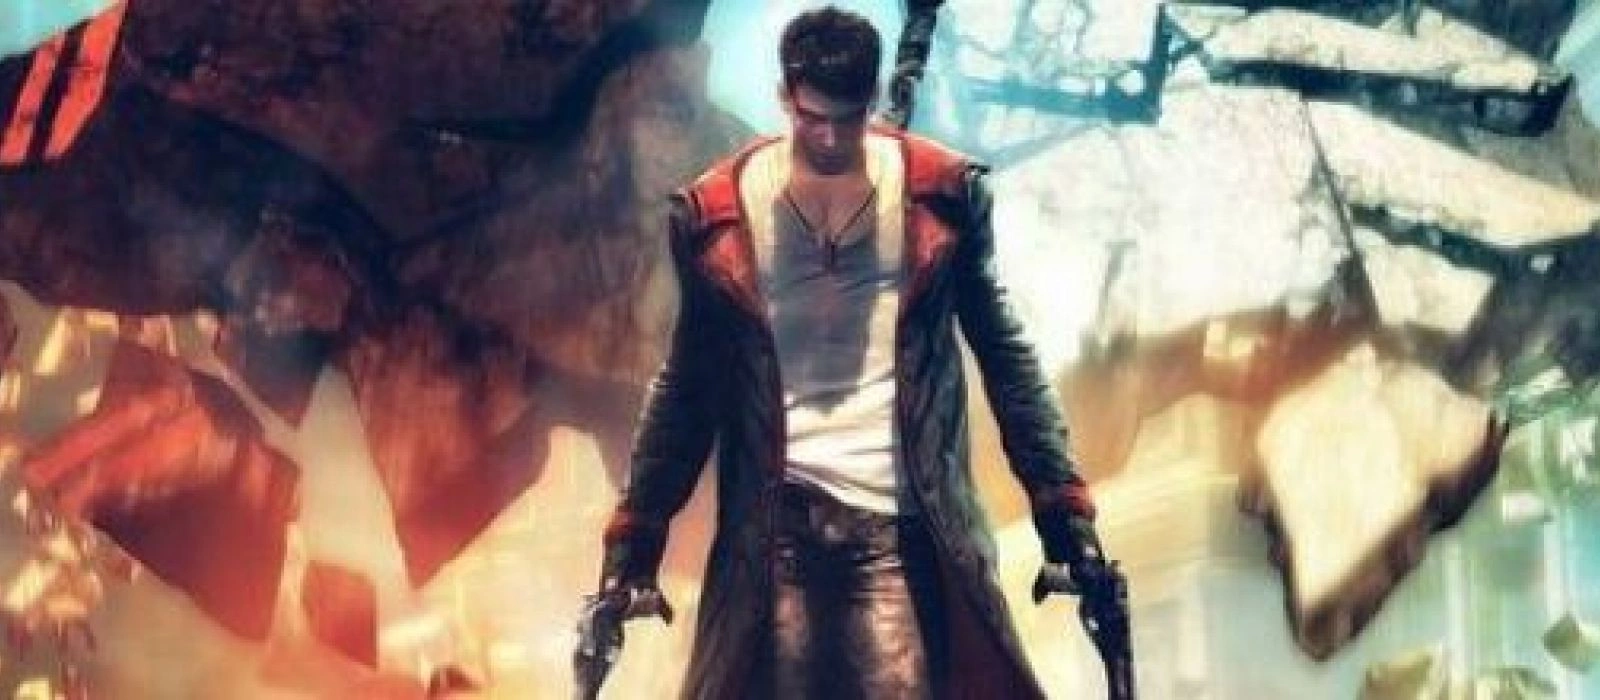 Devil may cry 3 steam not found фото 106